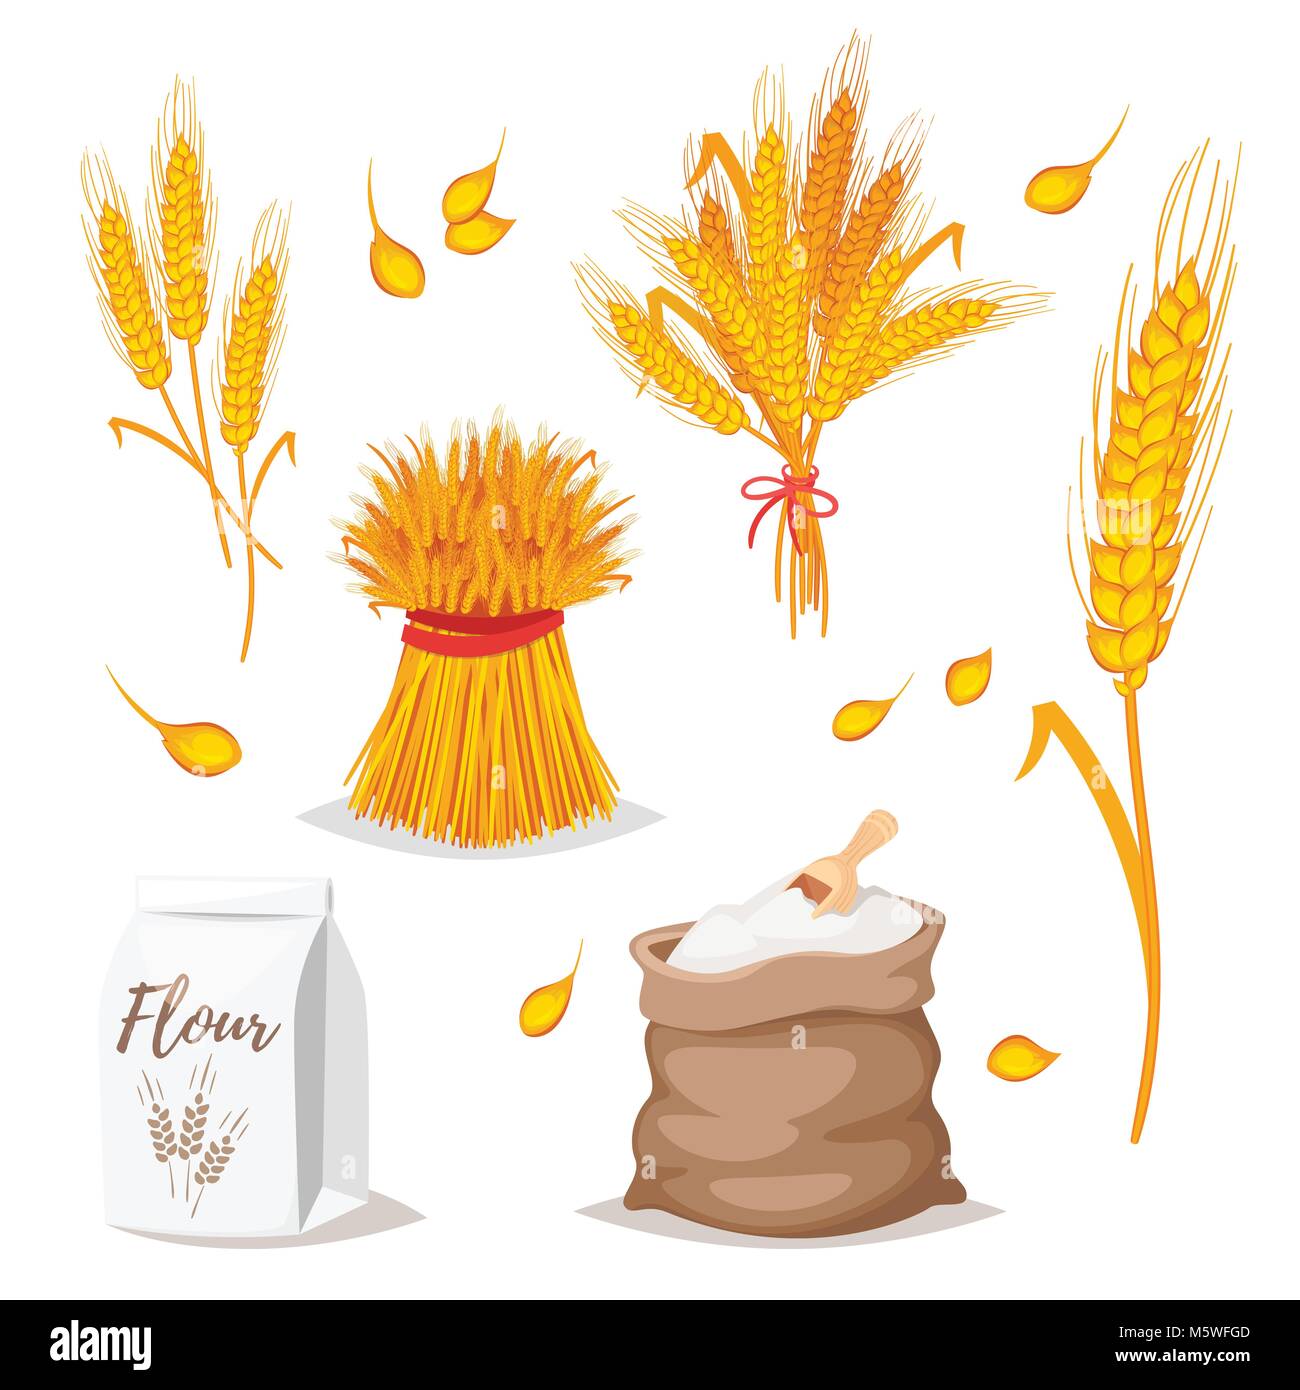 Vector cartoon style illustration of cereals - wheat. Grain plant isolated on white background. Ears of wheat, sheaf, and a packet of flour. Stock Vector